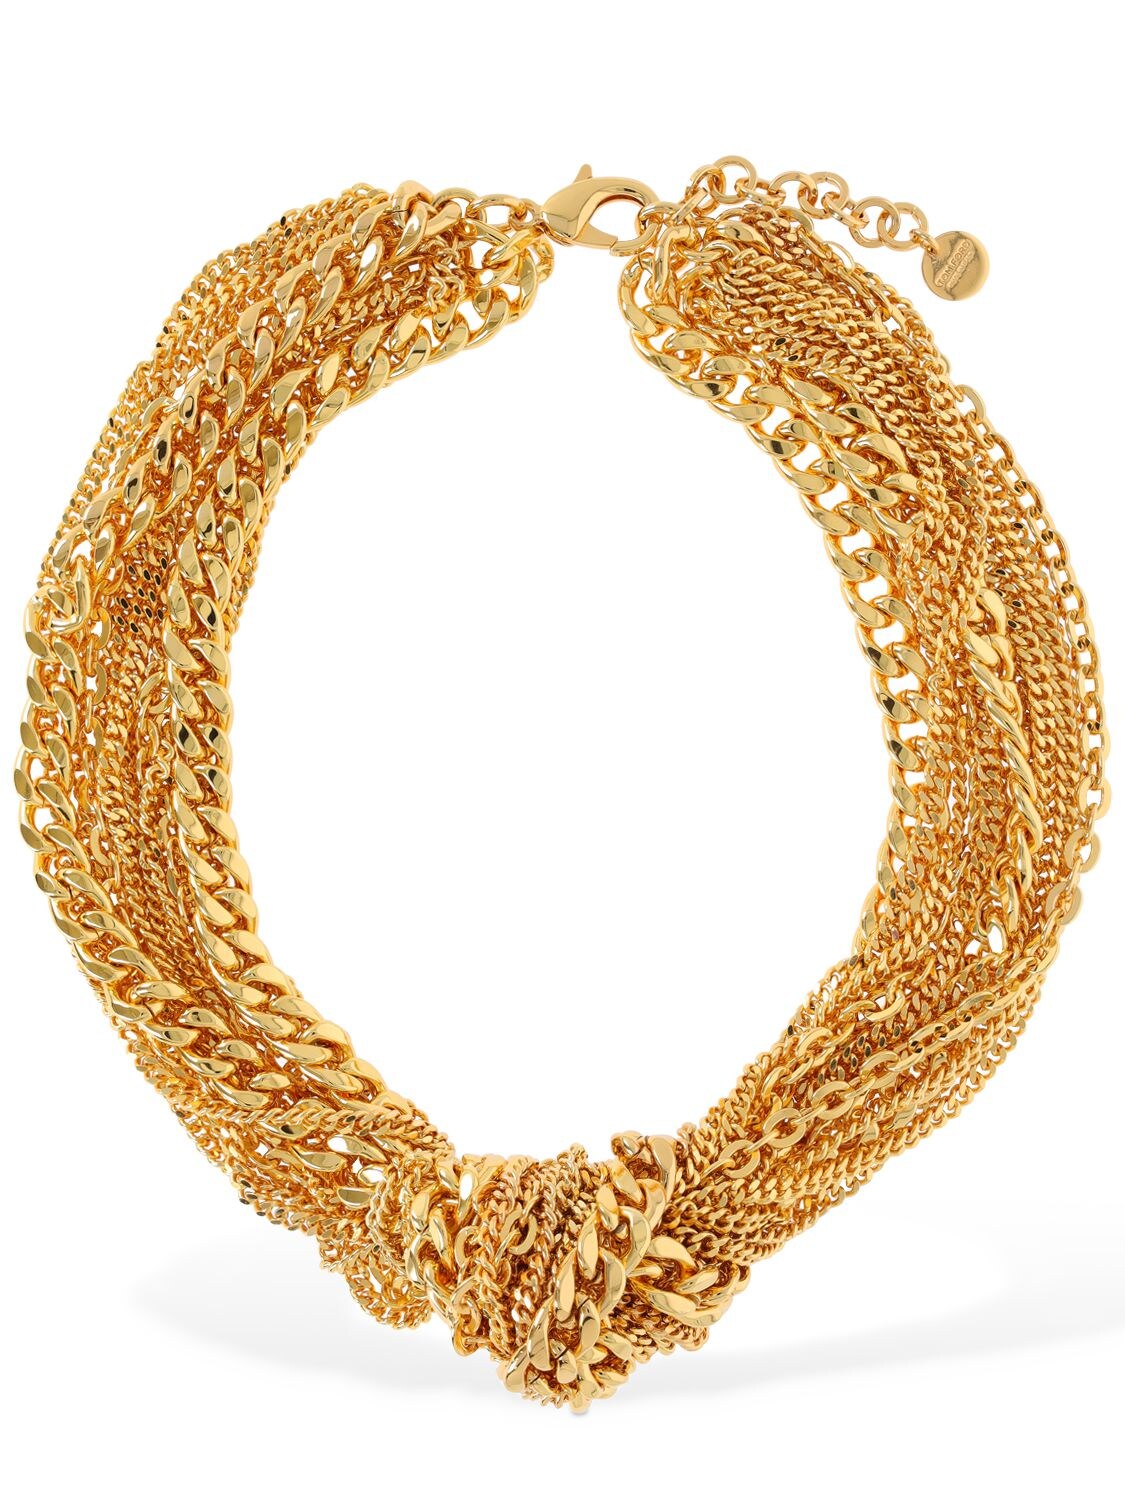 TOM FORD Multi-chain Knot Necklace